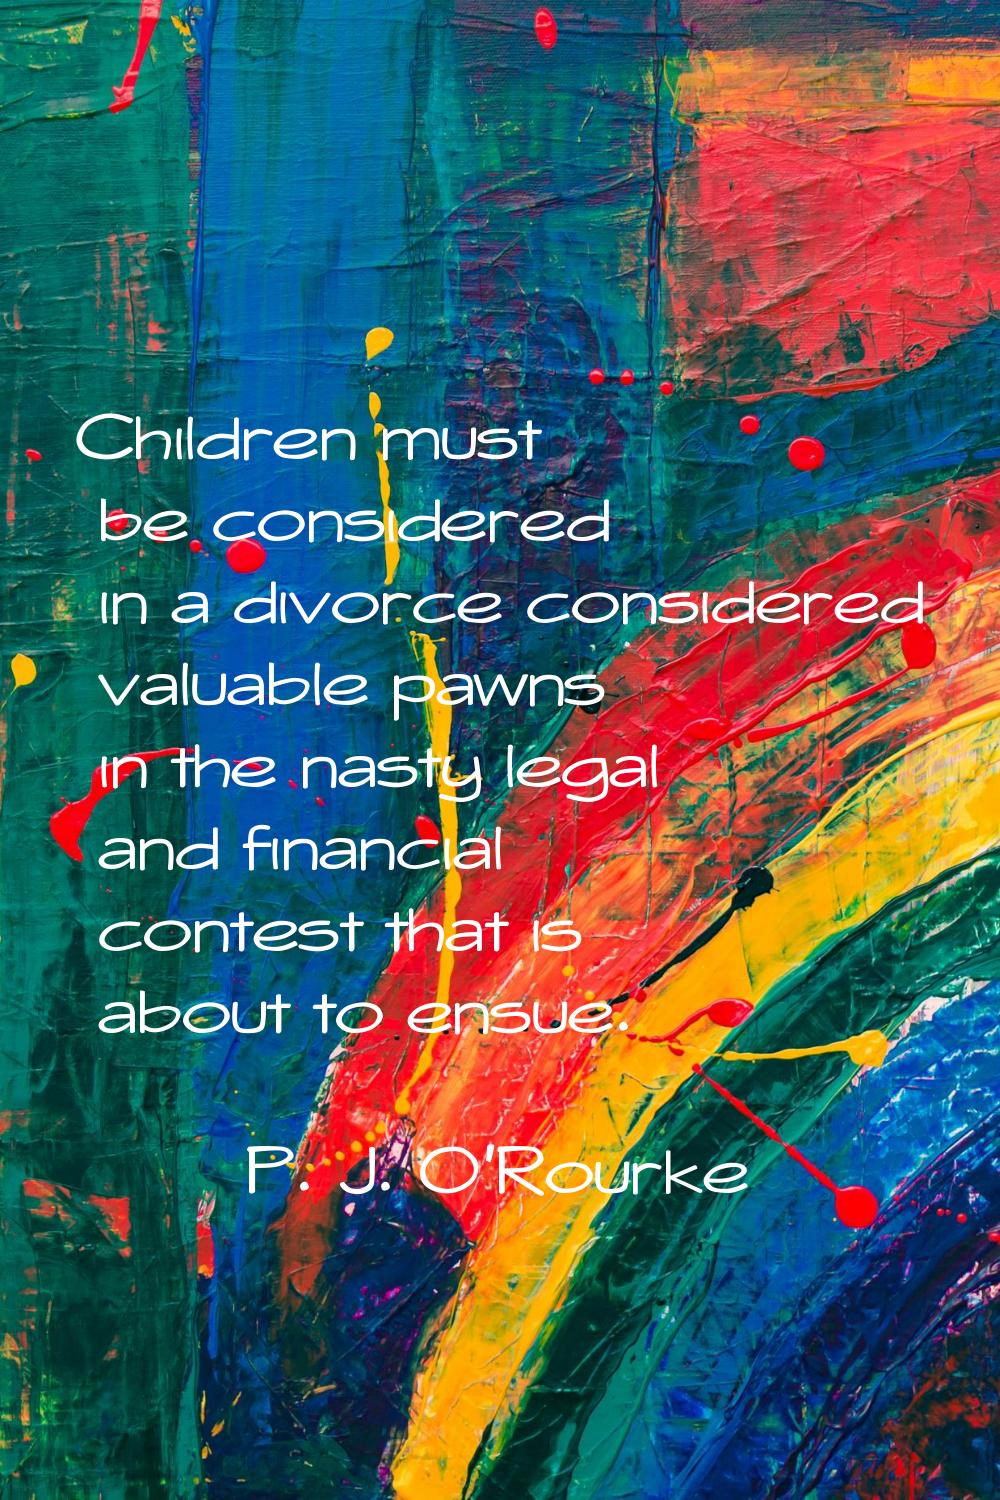 Children must be considered in a divorce considered valuable pawns in the nasty legal and financial